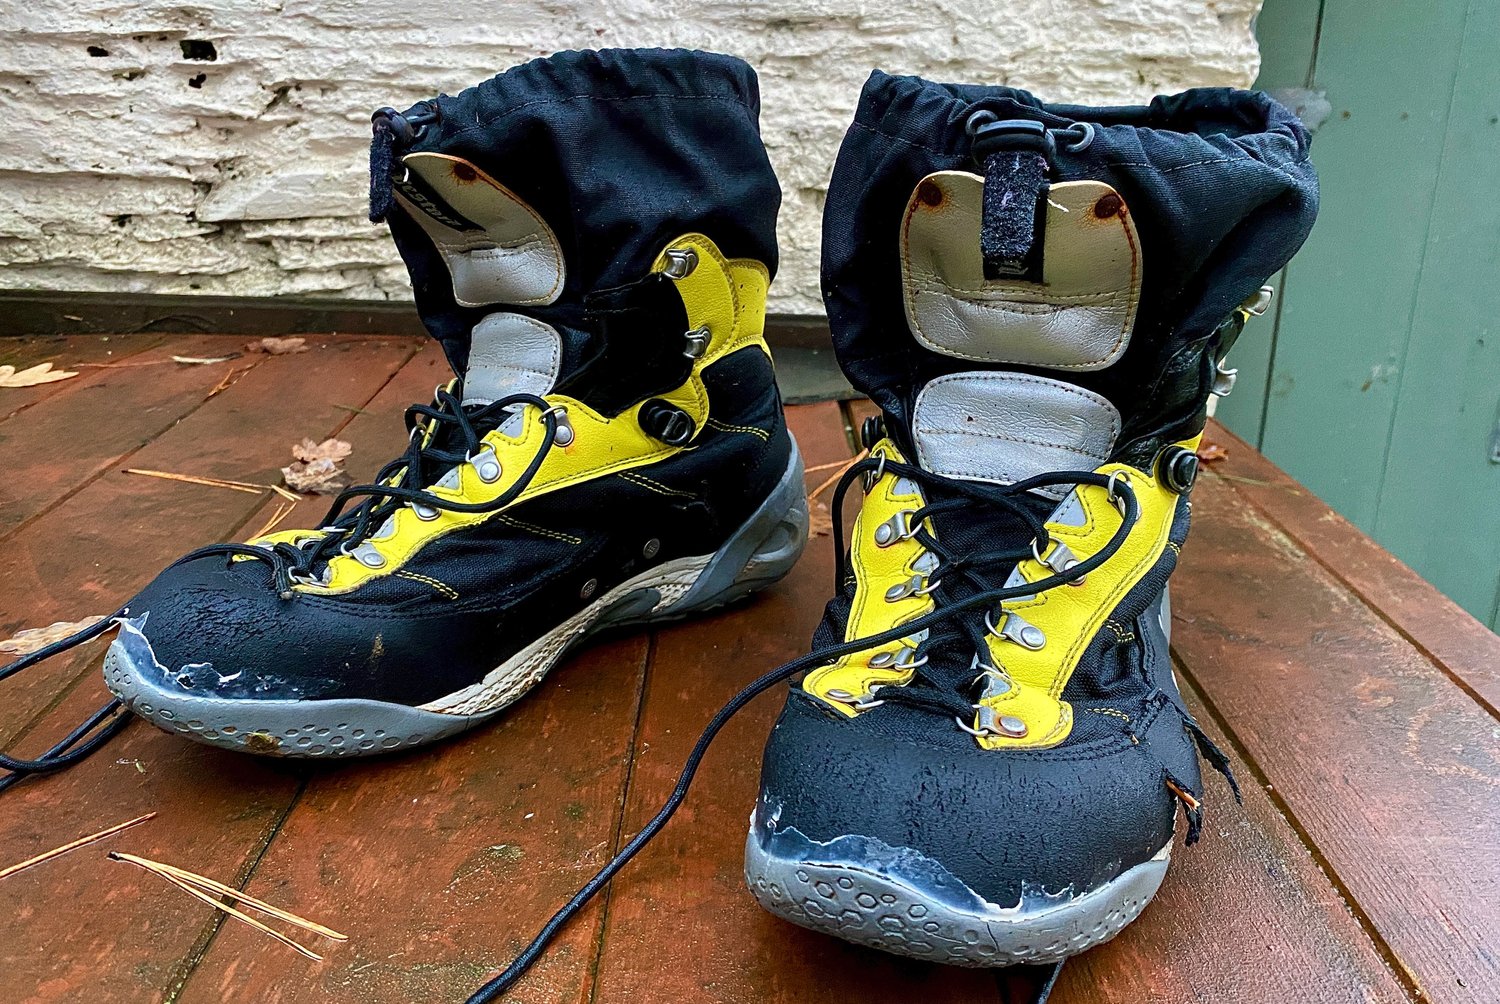 My Bestard SAR Pro Water rescue boots look like they are the end of their time - would I buy another pair? (final review) Gilbey